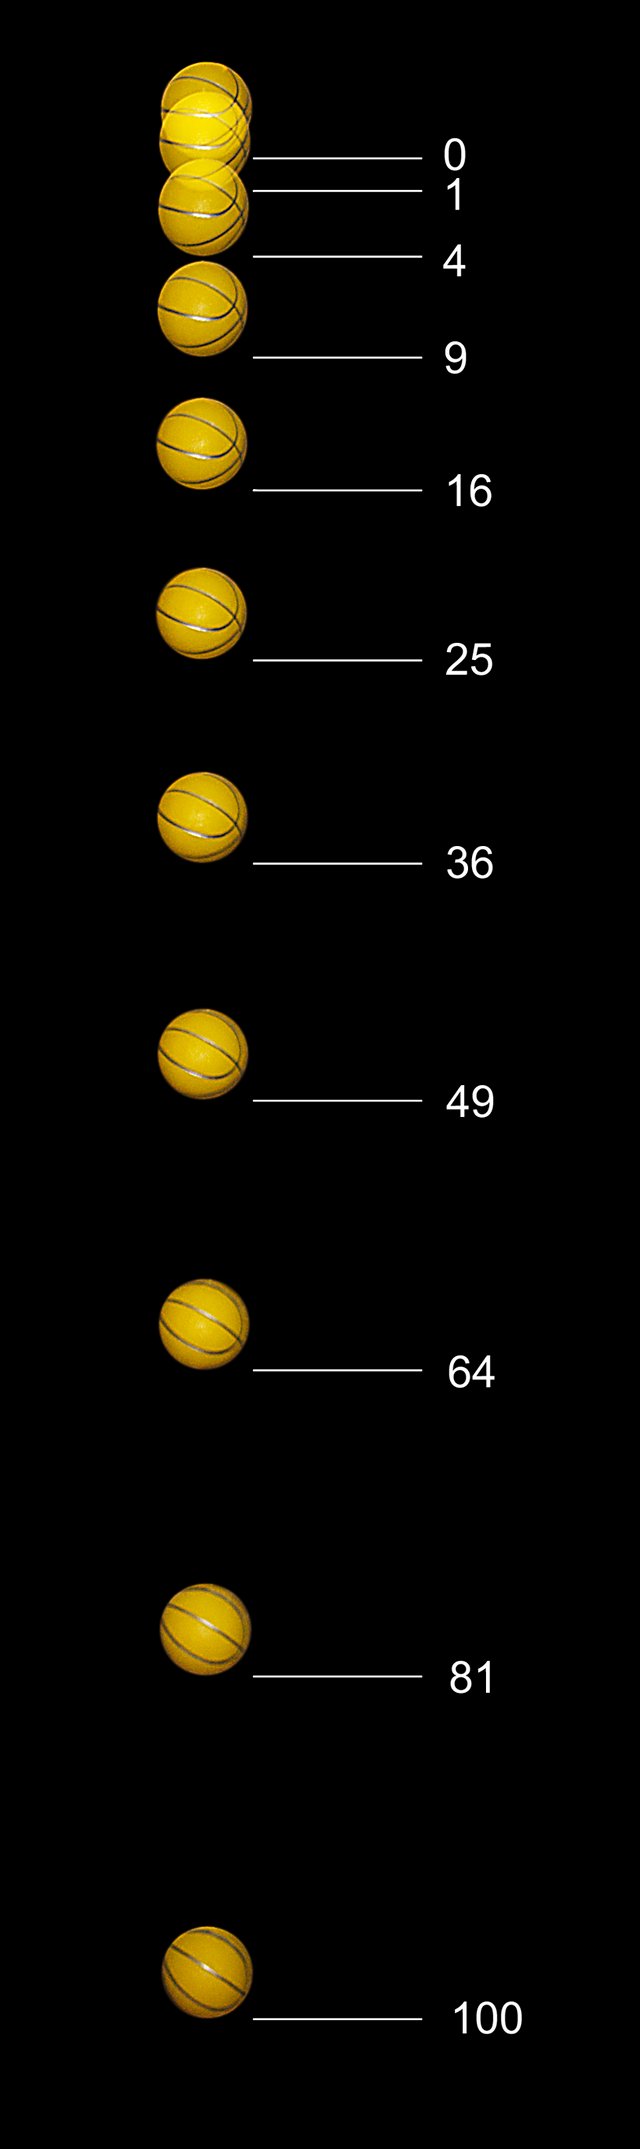 Images of a freely falling basketball taken with a stroboscope at 20 flashes per second. The distance units on the right are multiples of about 12 millimeters. The basketball starts at rest. At the time of the first flash (distance zero) it is released, after which the number of units fallen is equal to the square of the number of flashes.